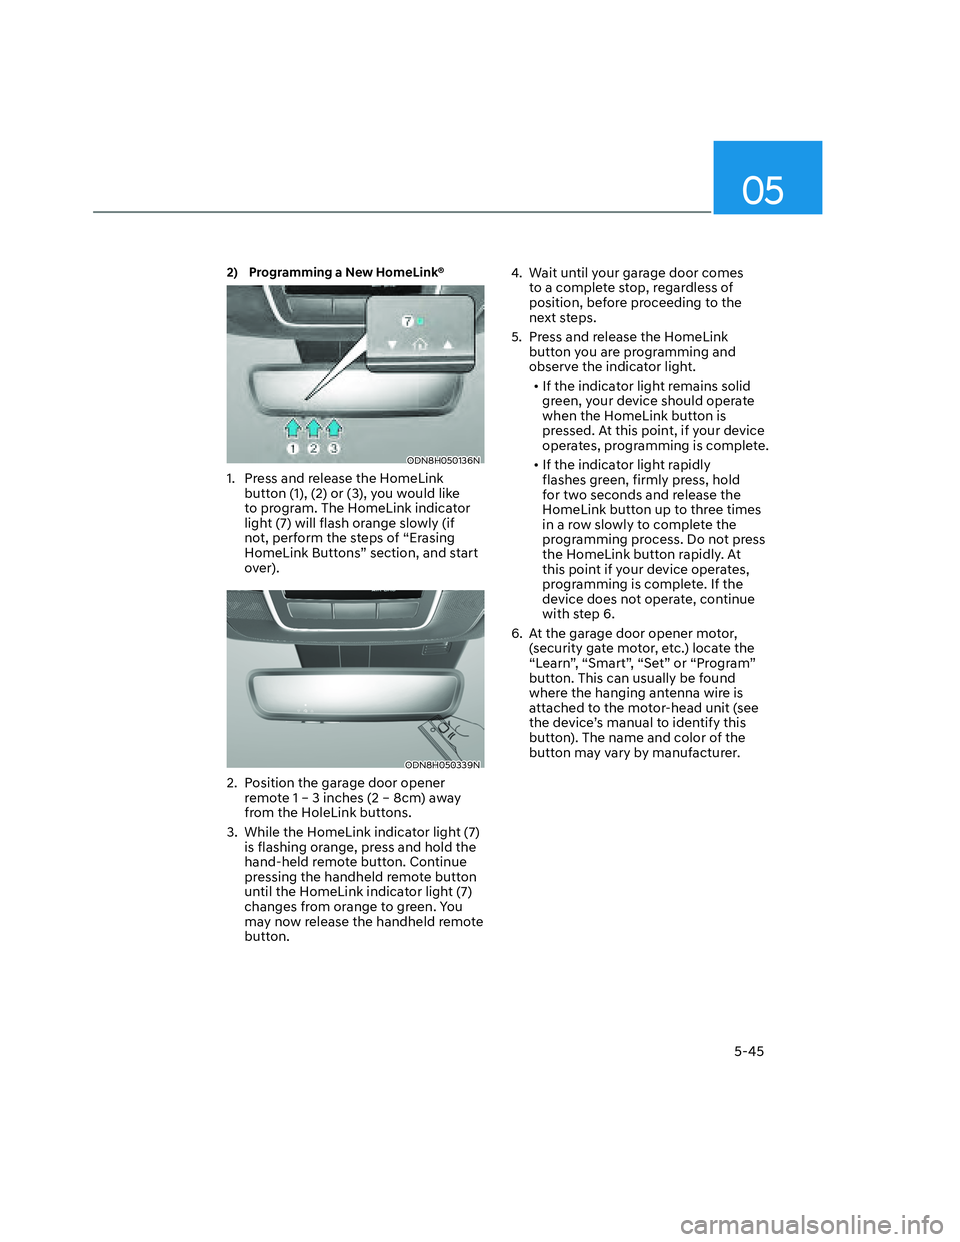 HYUNDAI SANTA CRUZ 2022  Owners Manual 05
5-45
2)  Programming a New HomeLink® 
ODN8H050136NODN8H050136N
1.  Press and release the HomeLink 
button (1), (2) or (3), you would like 
to program. The HomeLink indicator 
light (7) will flash 